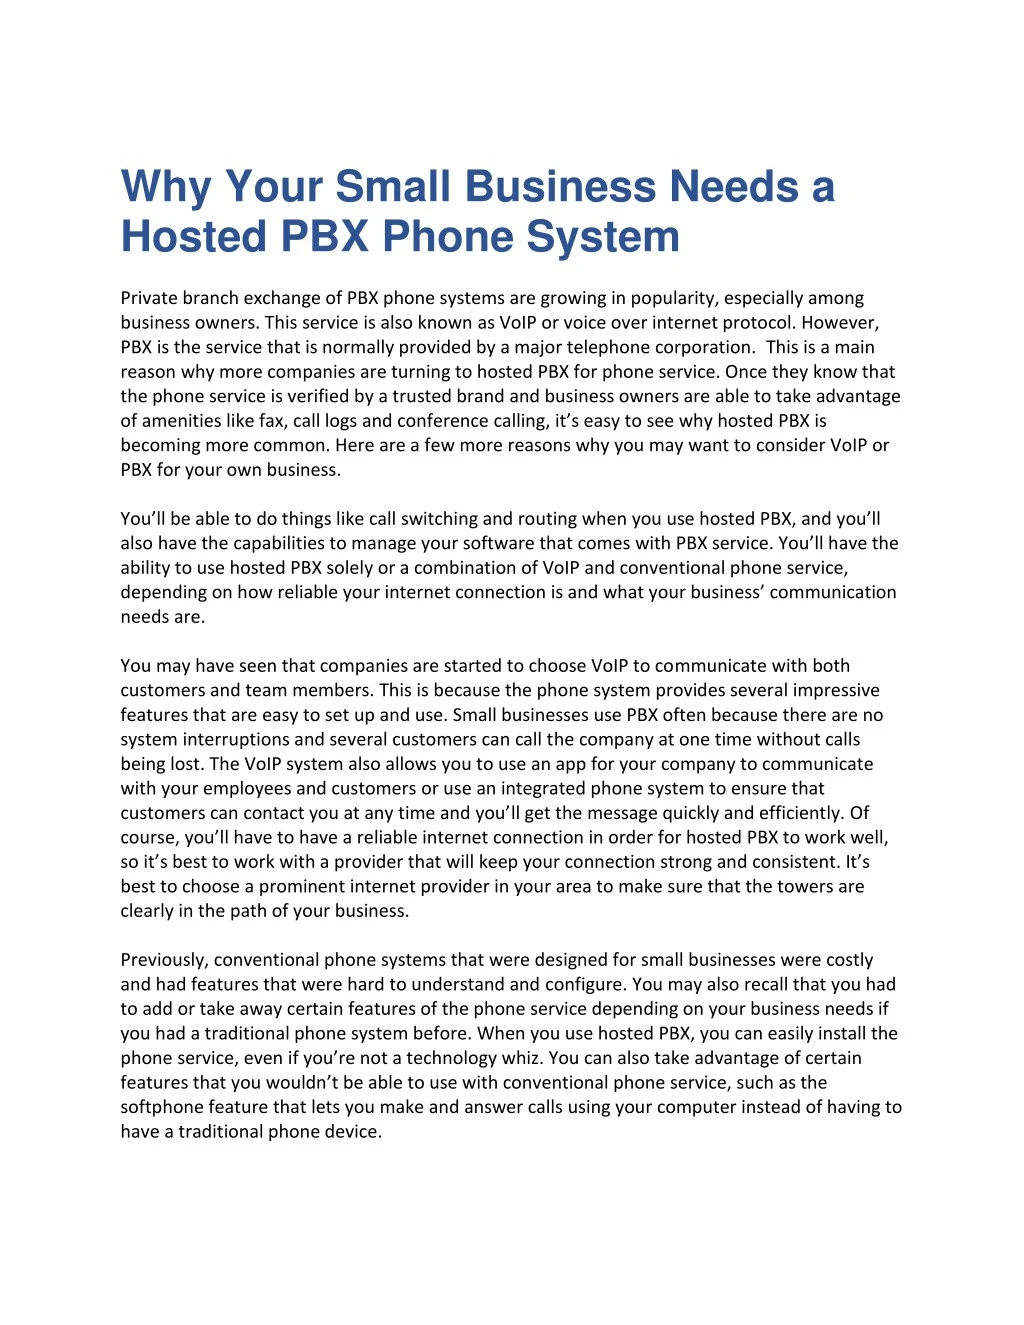 why your small business needs a hosted pbx phone